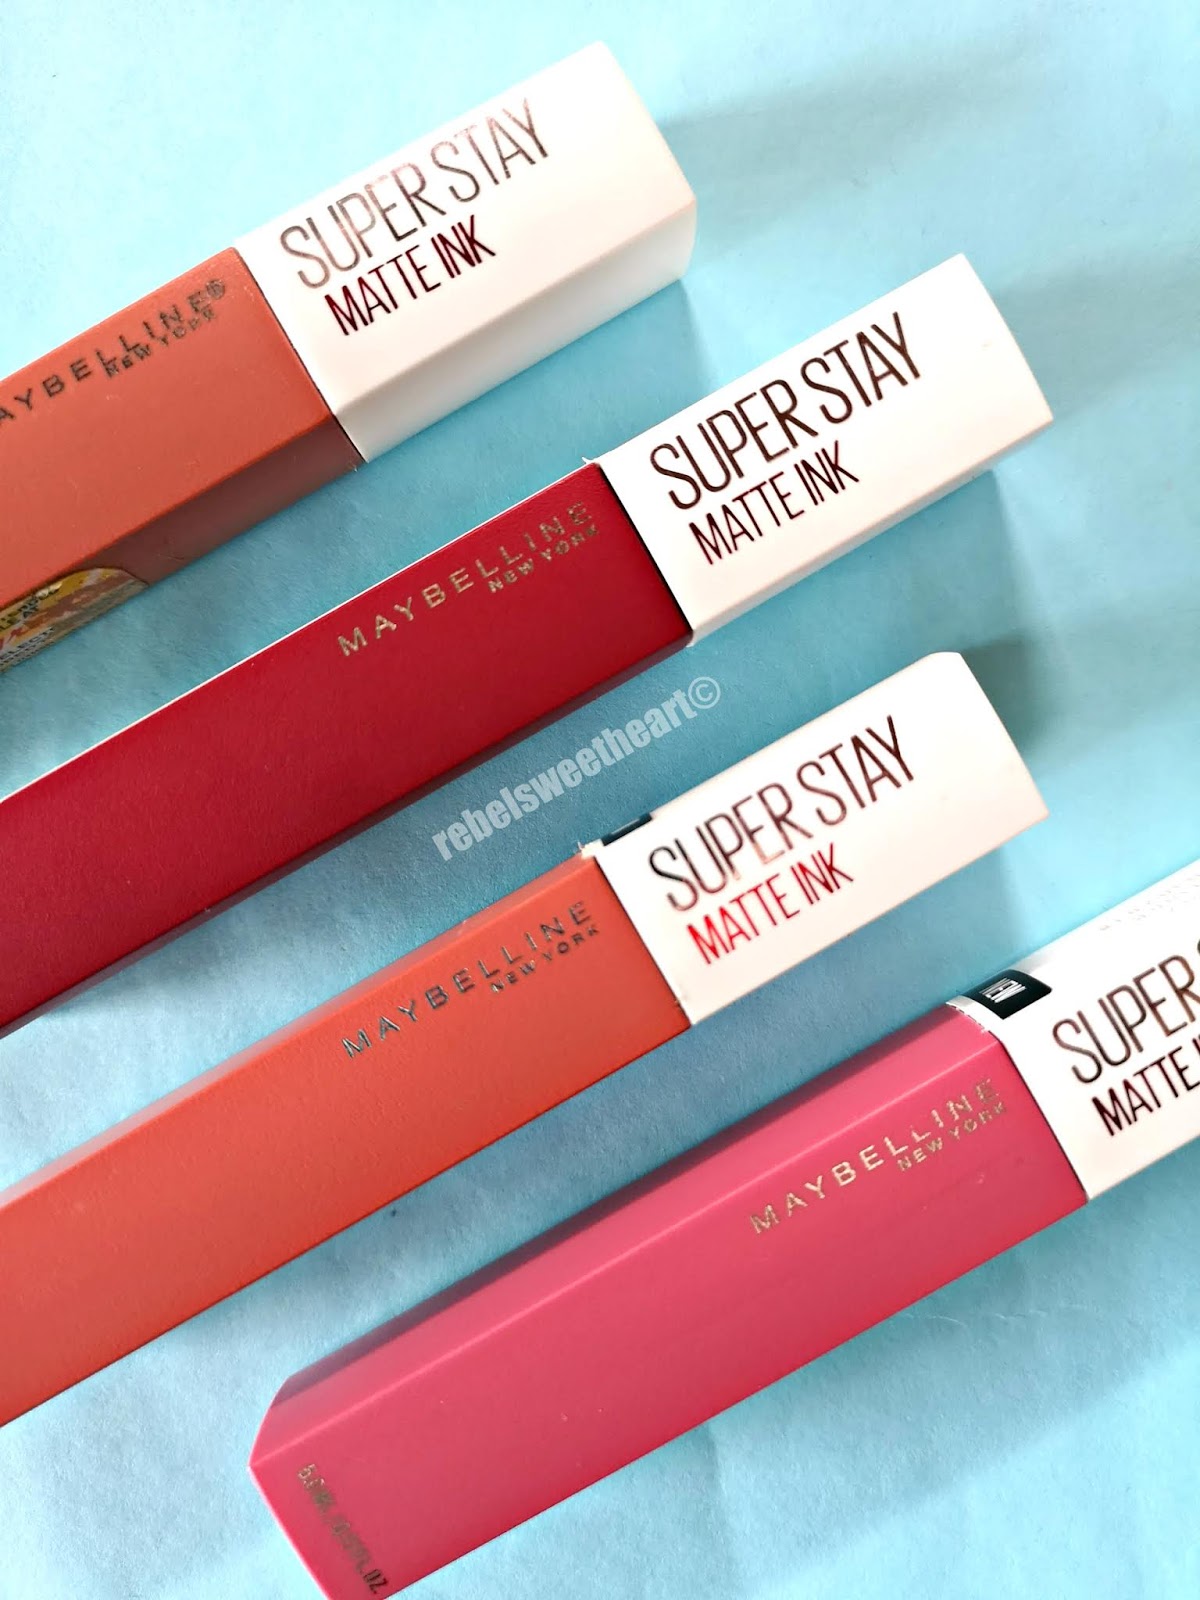 Maybelline super stay 65. Помада мейбелин супер стей 65. Мейбелин супер стей 120. Мейбелин супер стей 130. Мейбелин супер стей палитра.